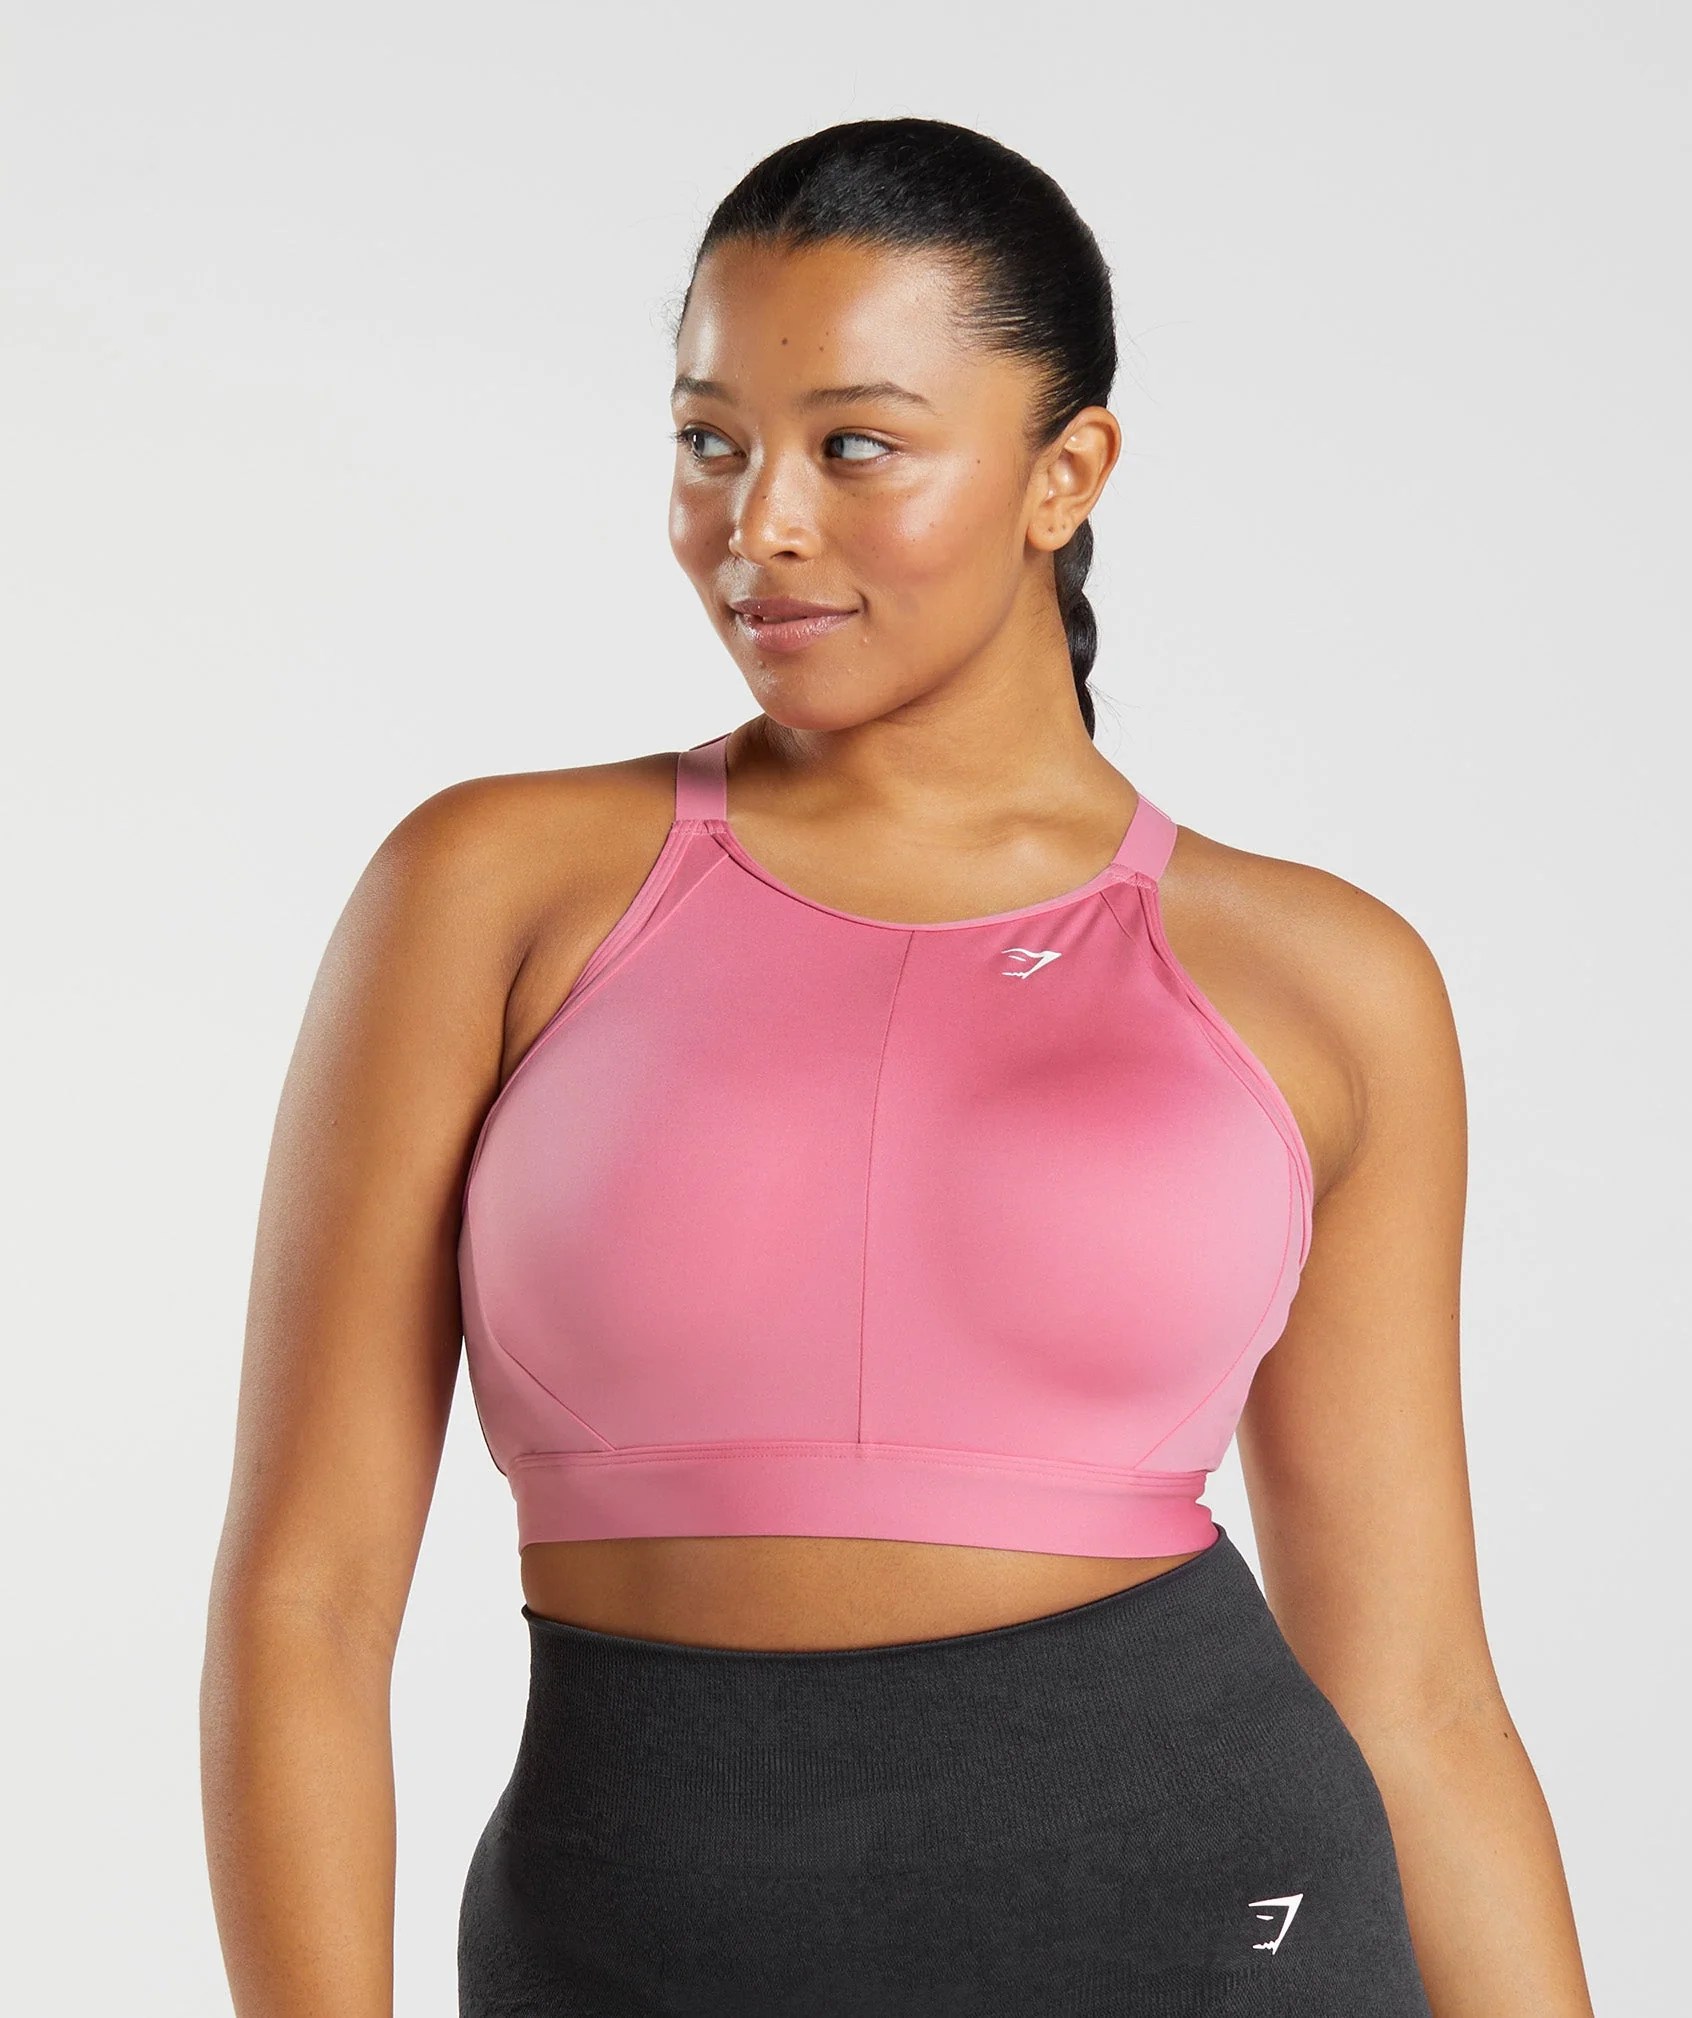 15 Supportive Sports Bras Fit for Your Next High-Impact Workout